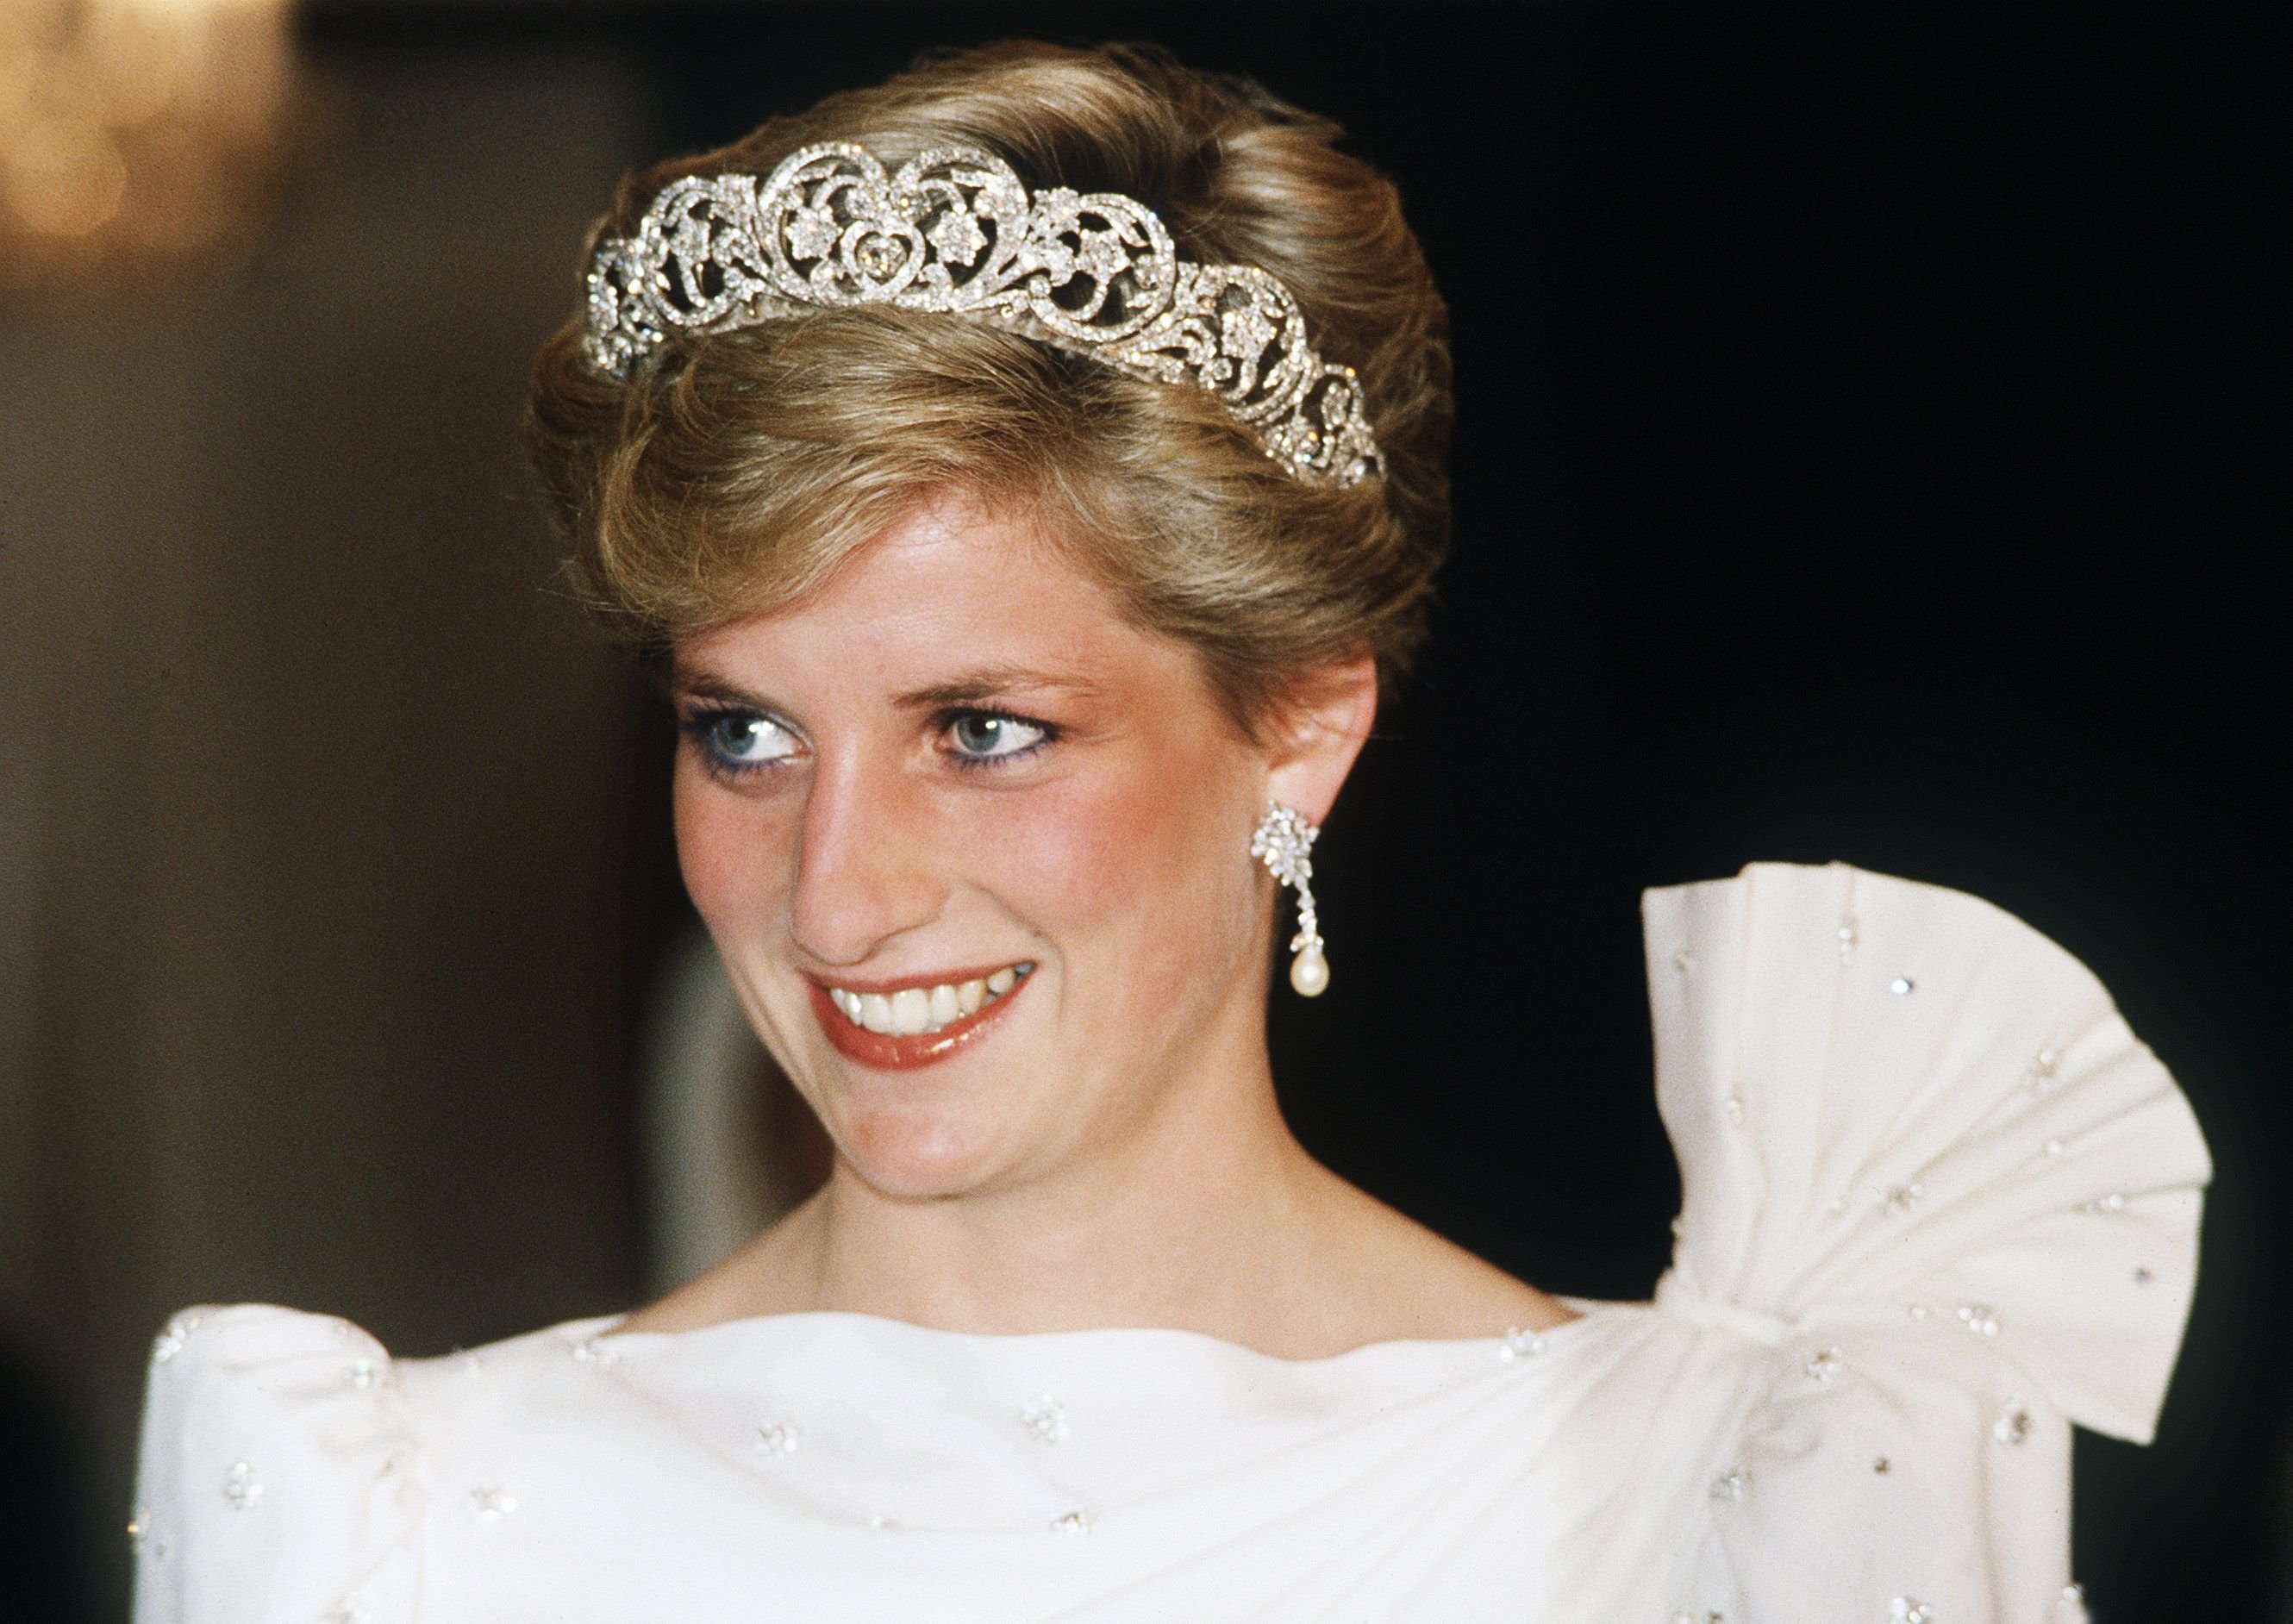 Princess Diana attends a State Banquet on November 16, 1986 in Bahrain. | Source: Getty Images